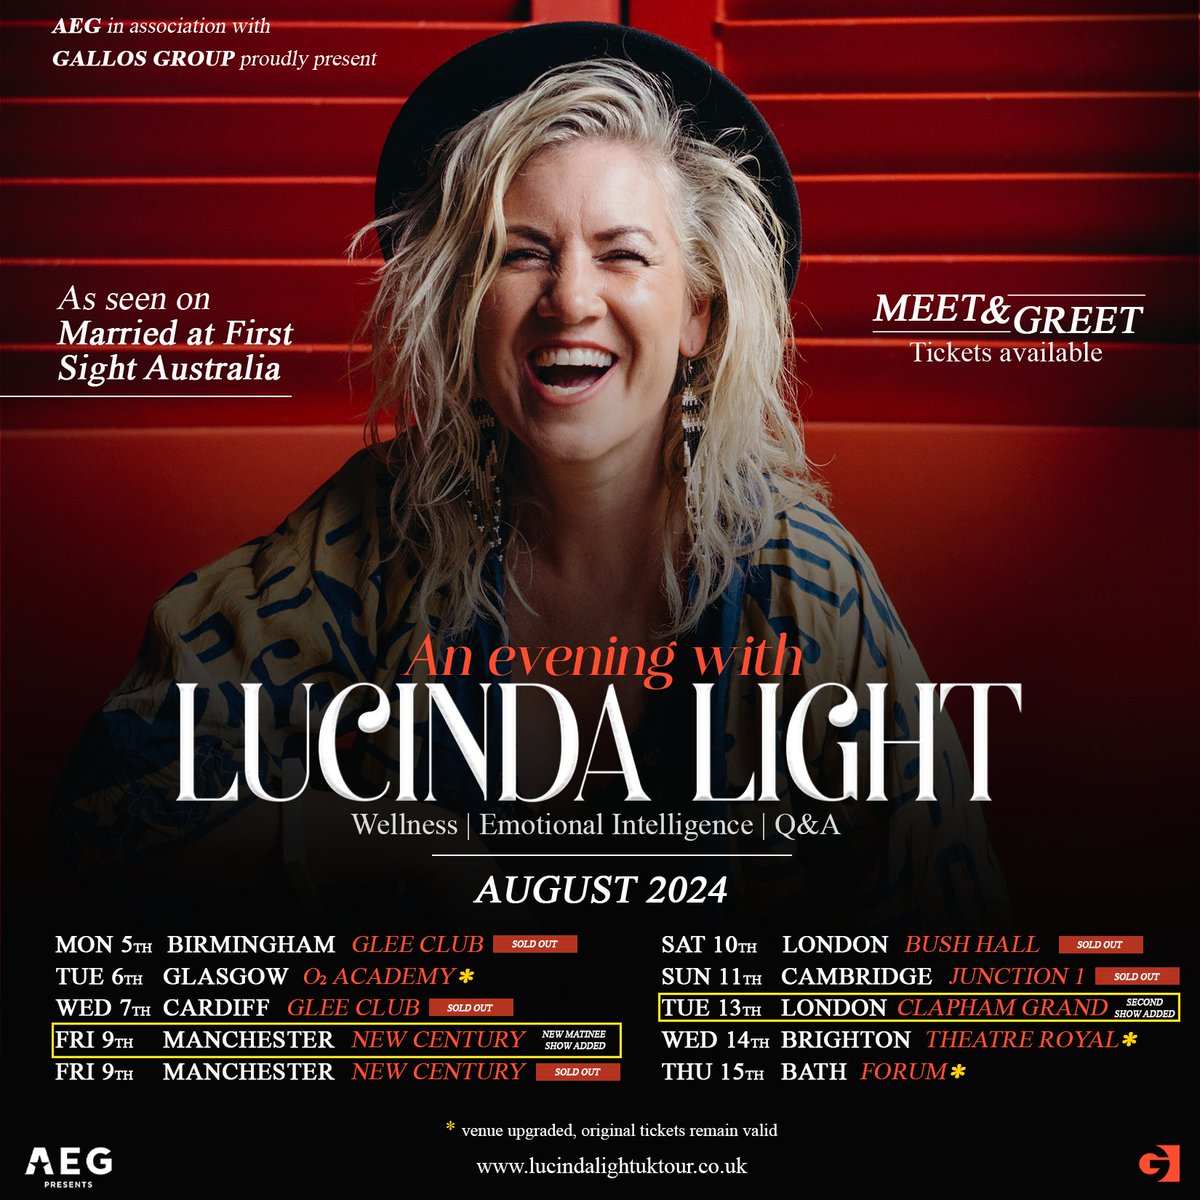 After gaining a legion of fans during her time on Married At First Sight Australia, Lucinda Light heads out on tour titled 'An Evening With Lucinda Light', here Tue 6 Aug. ✨ Tickets on sale 2pm Mon 13 May 👉 amg-venues.com/3BNa50RBWPB *original Oran Mor tickets remain valid